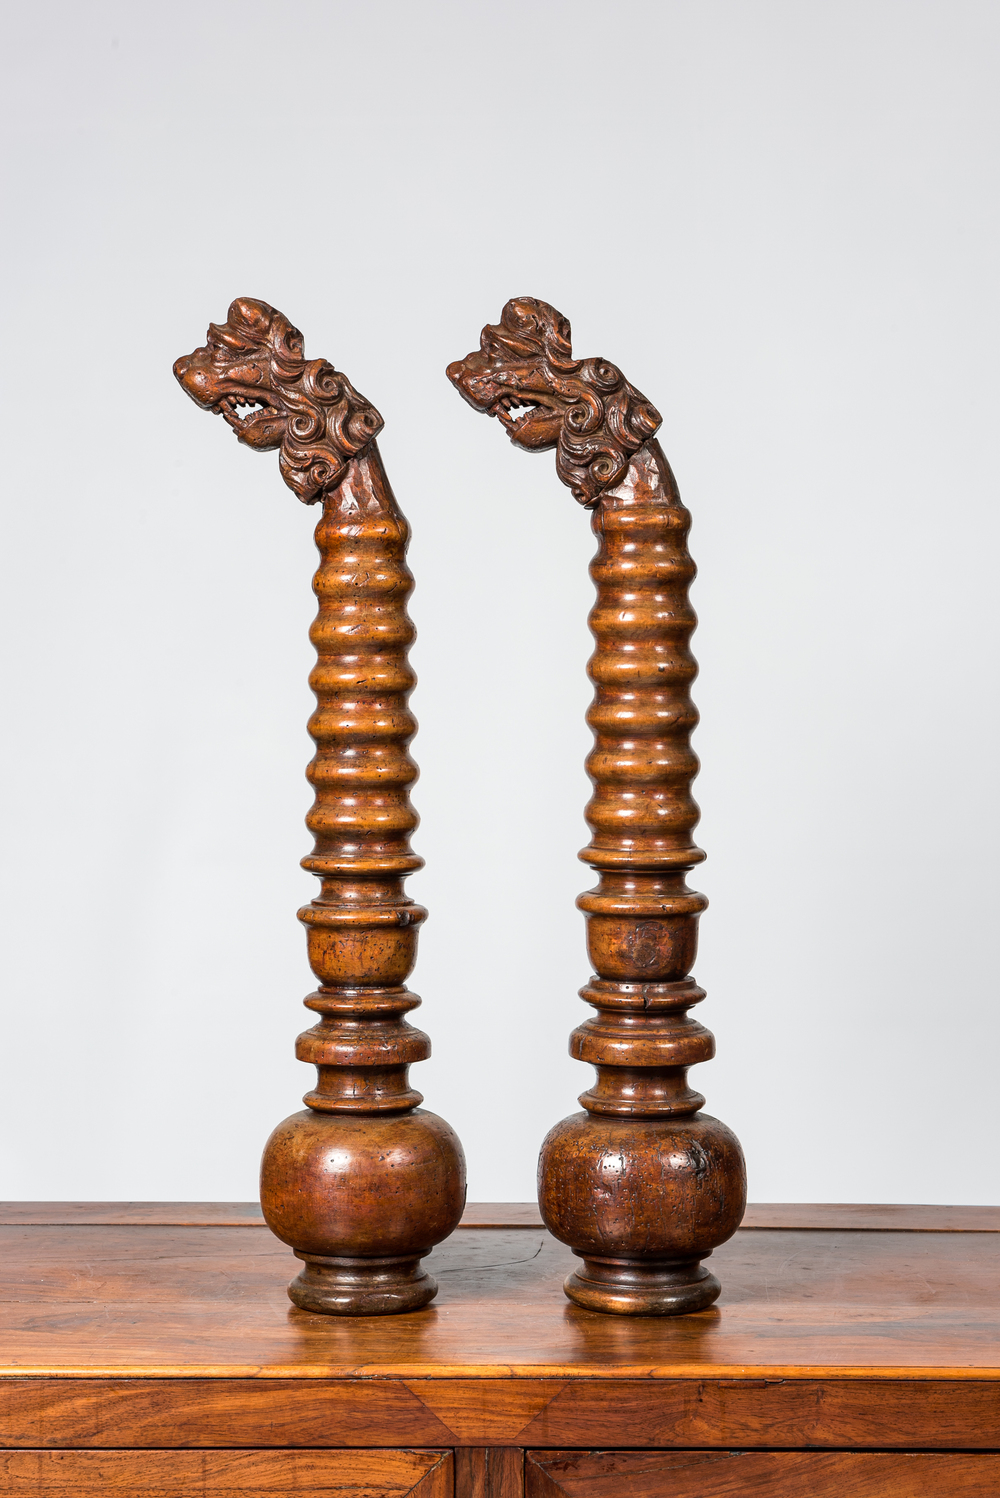 A pair of Italian baluster-shaped elements topped with lions' heads, 17/18th C. and later